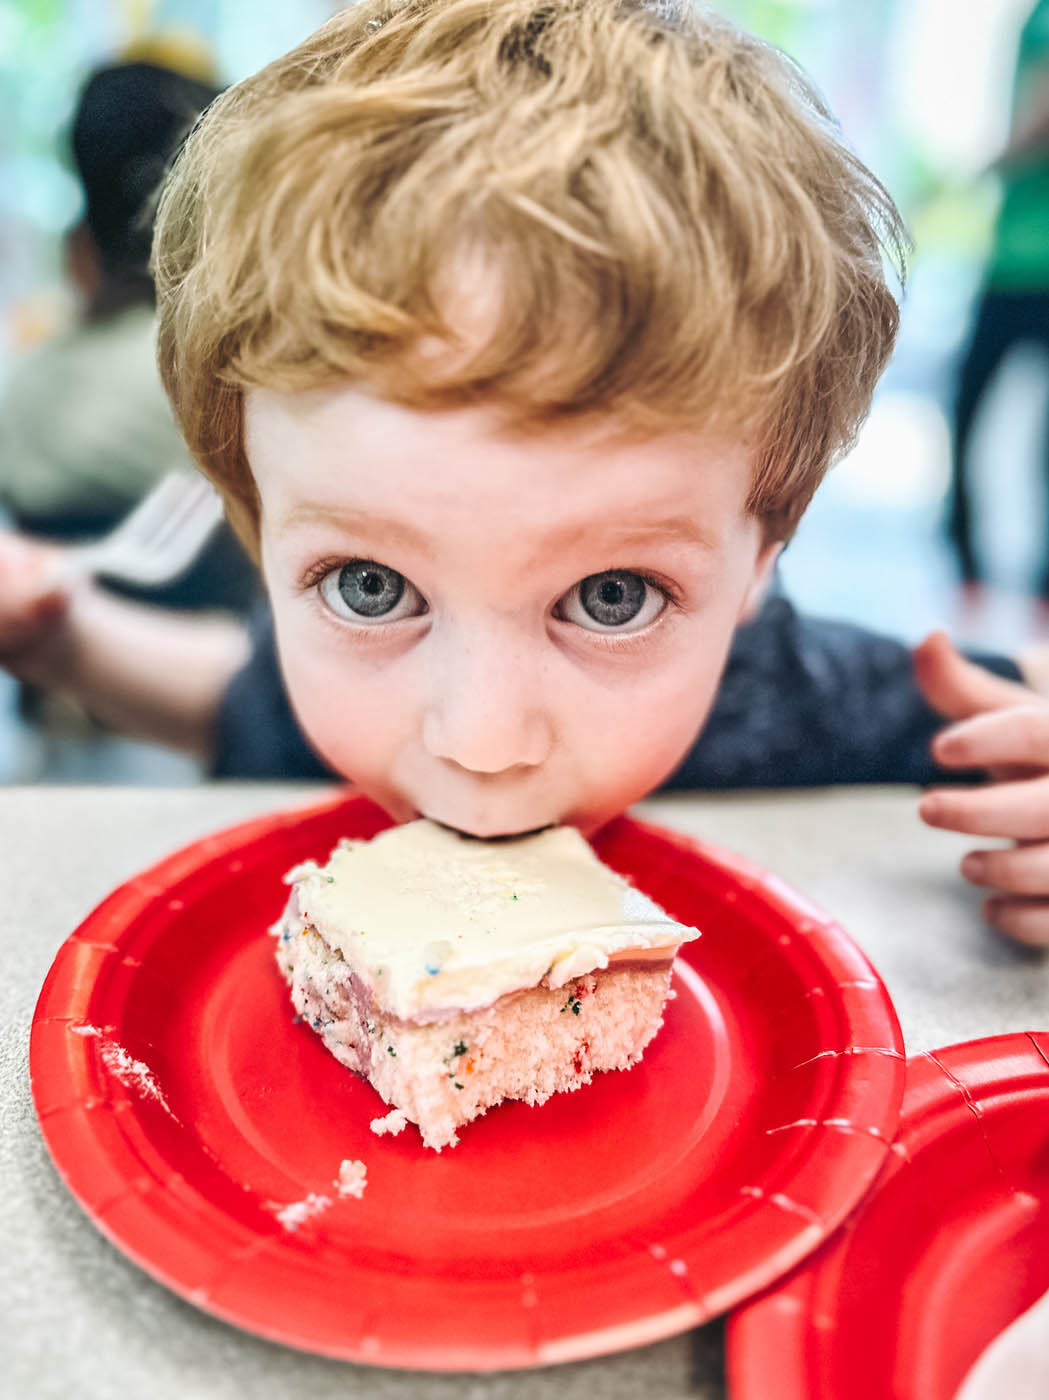 A kid taking a big bite out of a cake piece at Romp n' Roll - a children's party place in Glen Allen, VA.